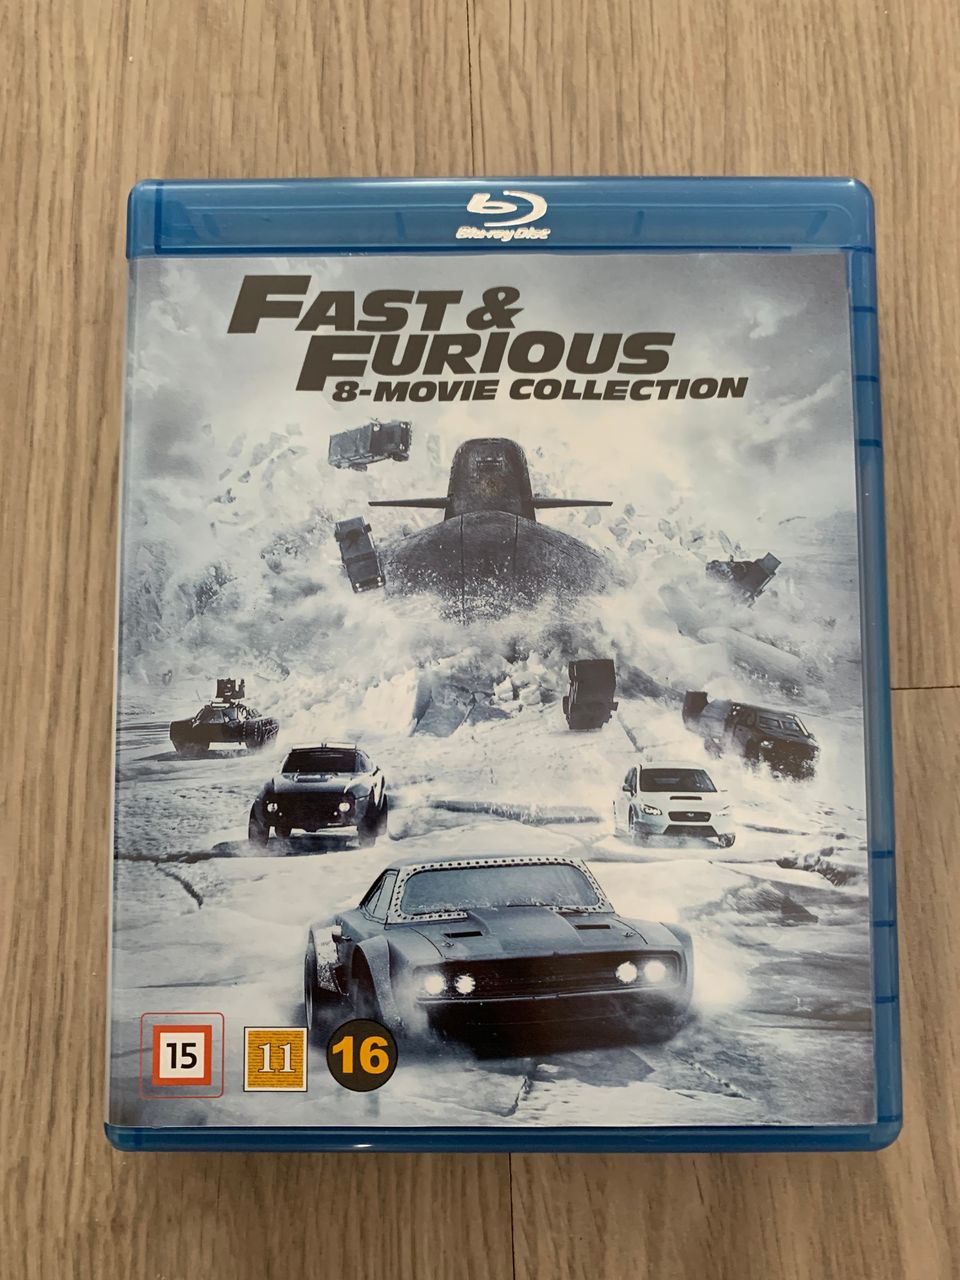 Fast & Furious 8-movie collection